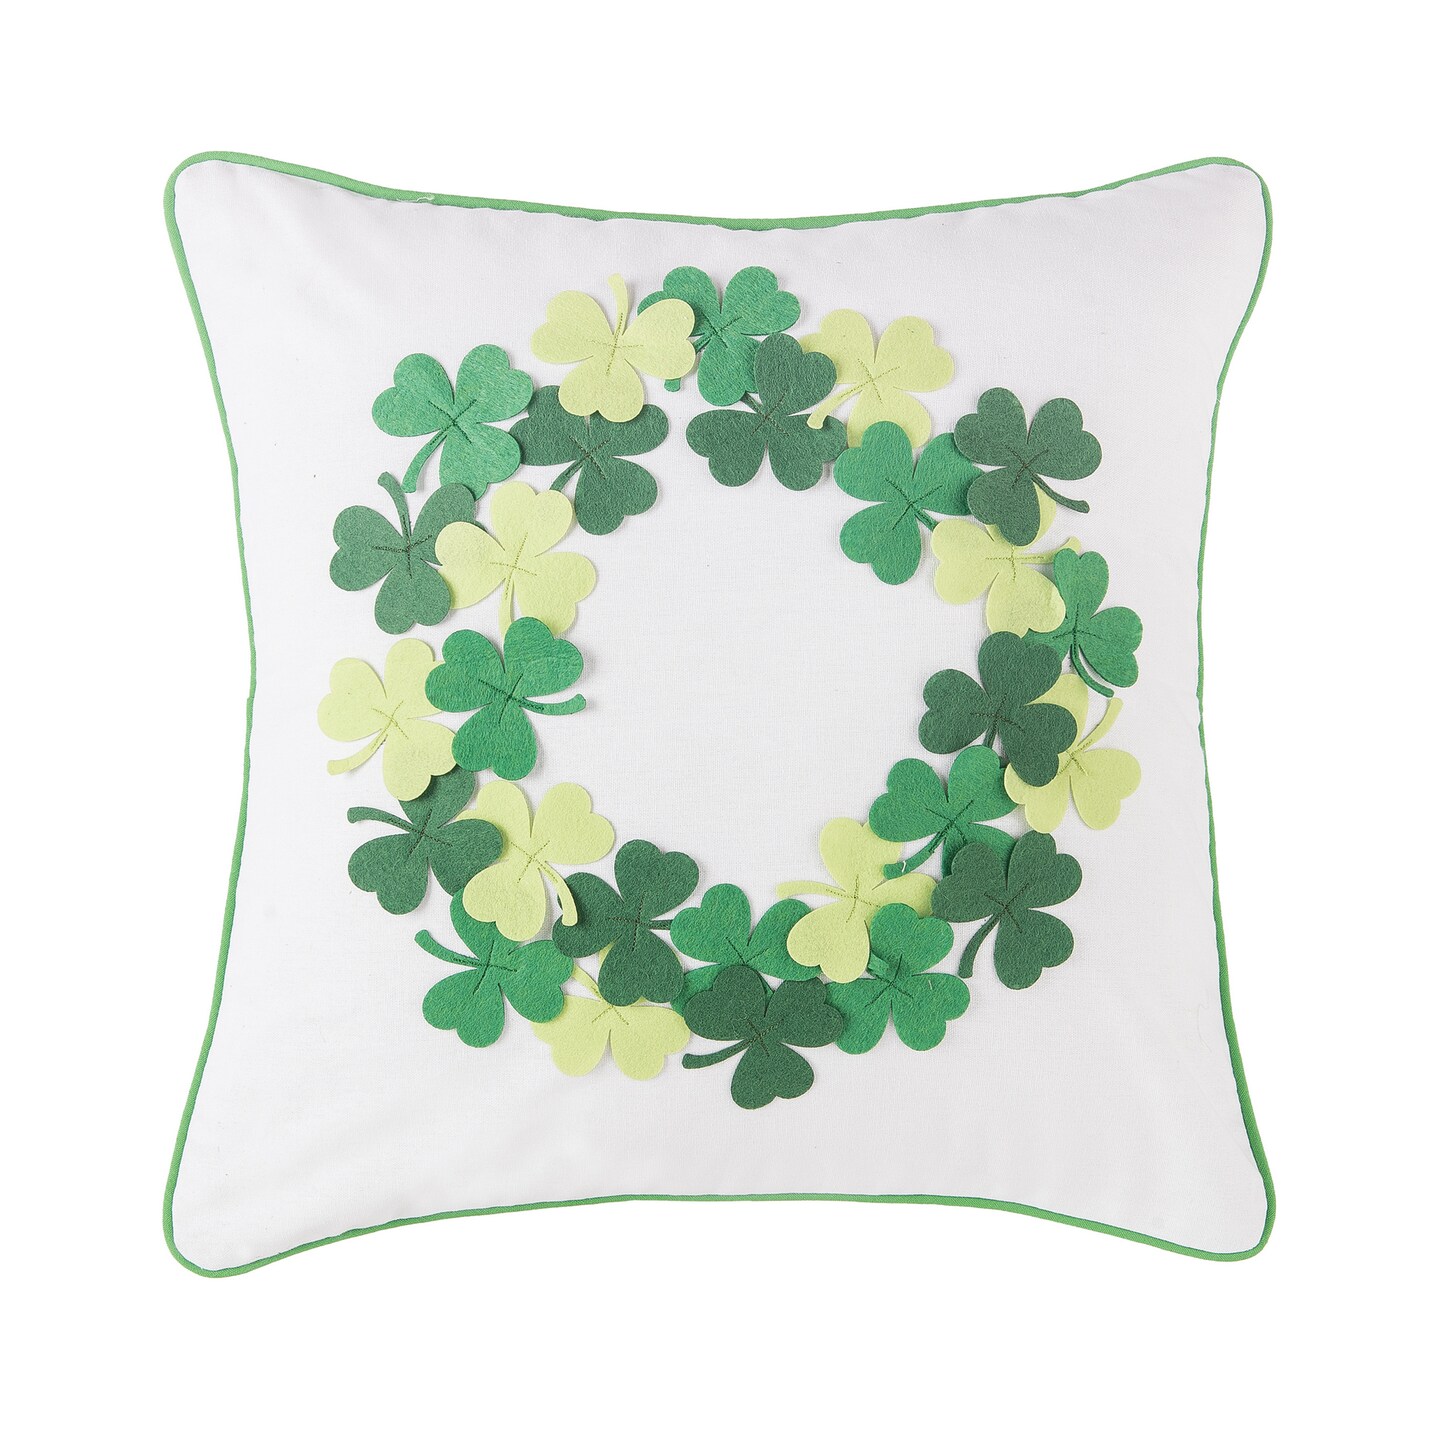 Clover Wreath Applique 18 X 18 Inch Throw Pillow St. Patrick&#x27;s Day Decorative Accent Covers For Couch And Bed